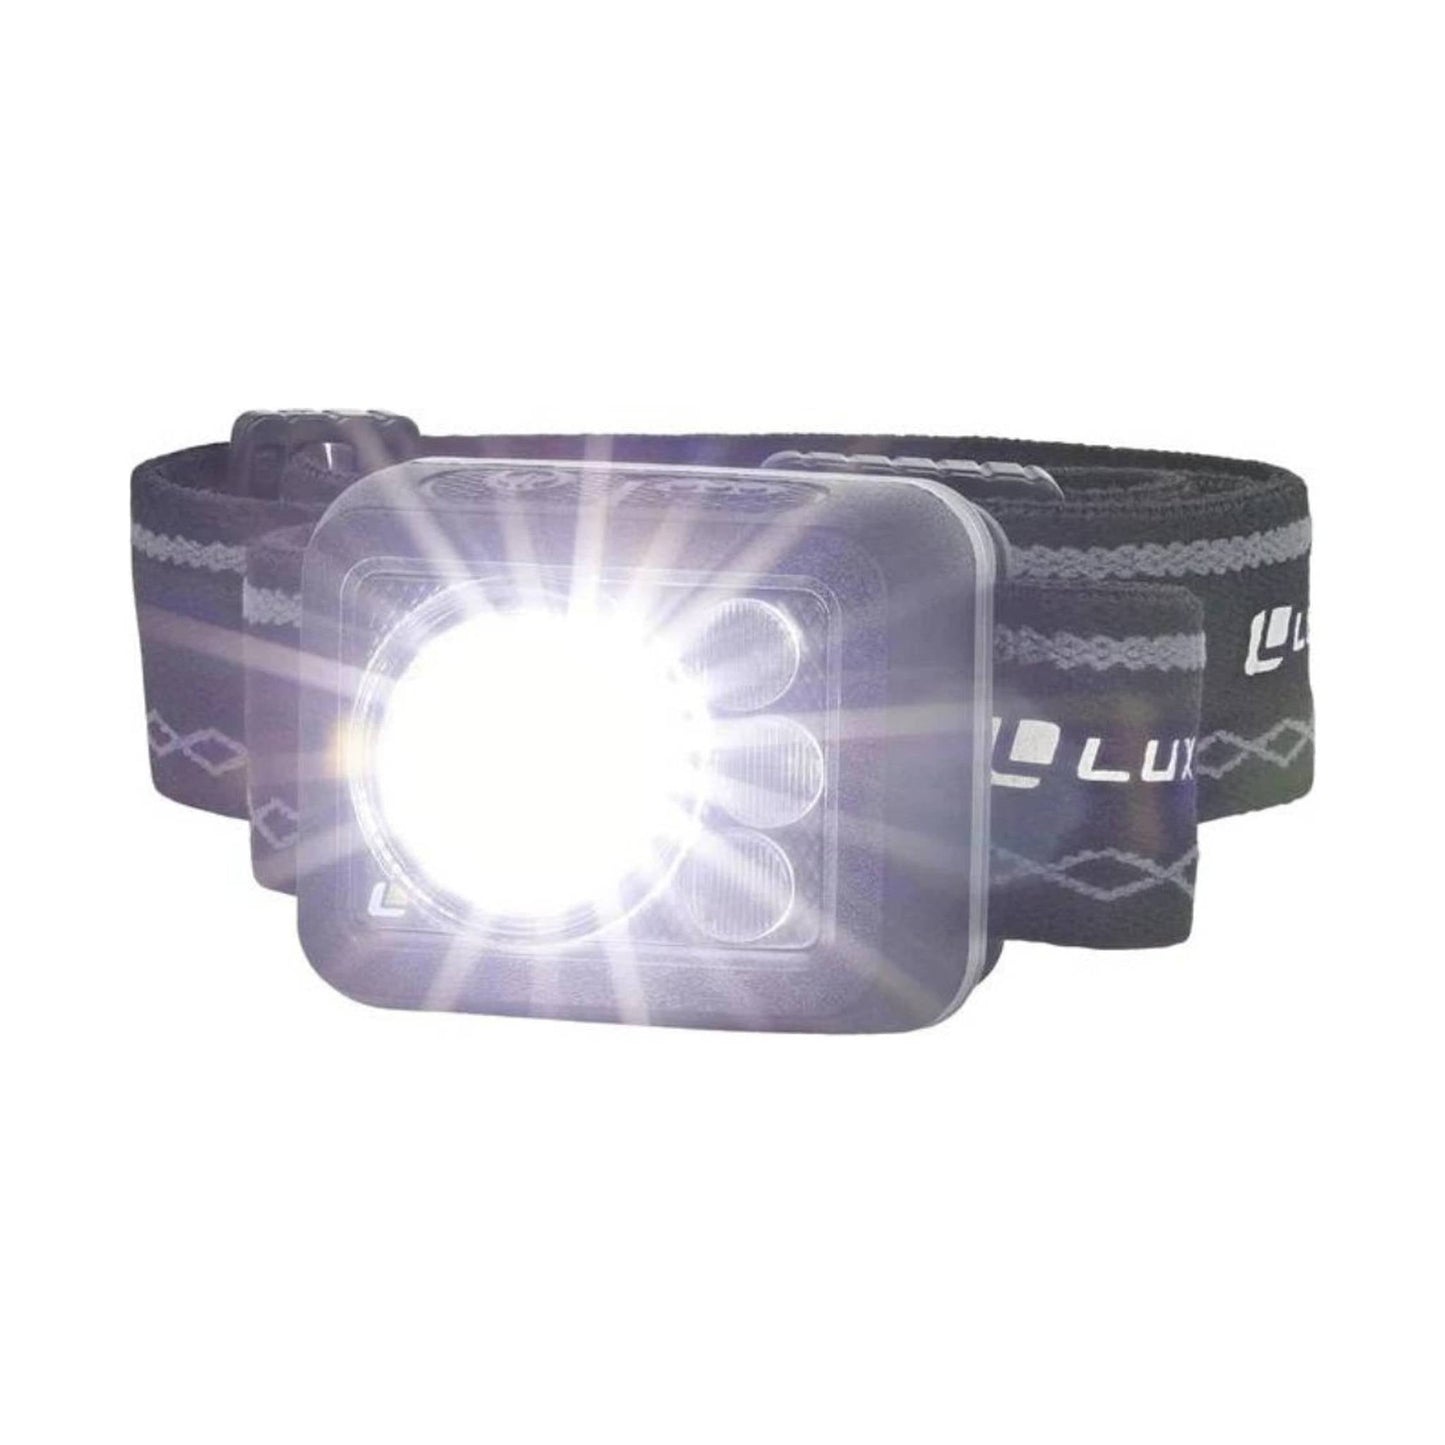 Luxpro LP738 Waterproof Multi-Color Ultralight LED Rechargeable Headlamp